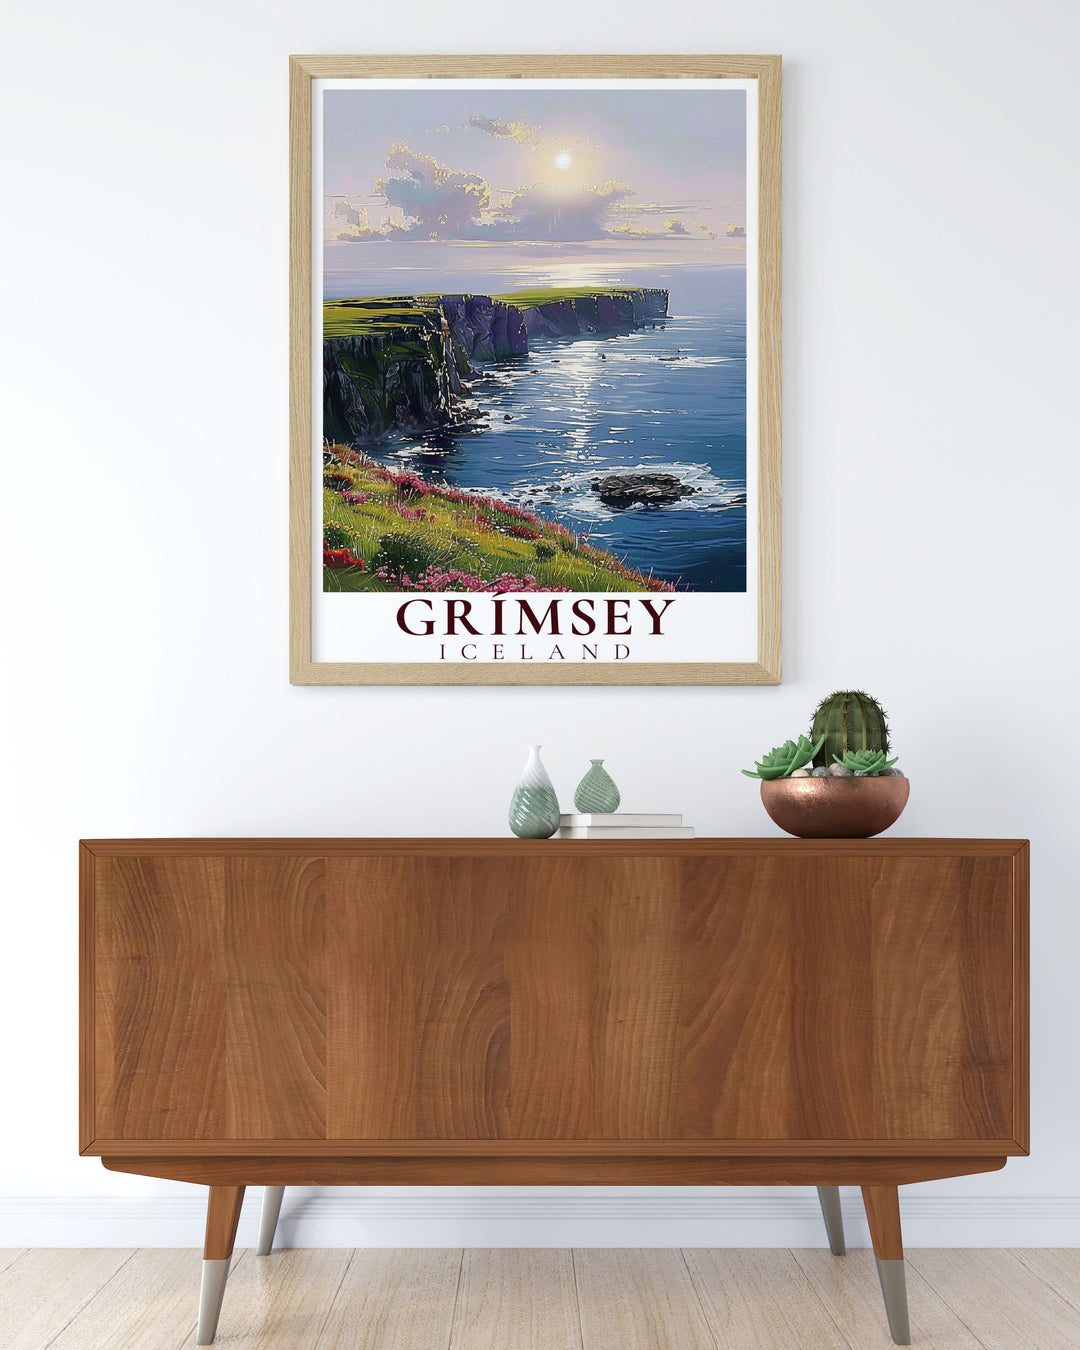 This art print features the historic Grimsey Lighthouse against the rugged Icelandic coastline, offering a glimpse into the islands rich maritime heritage and making it a great addition to any room.